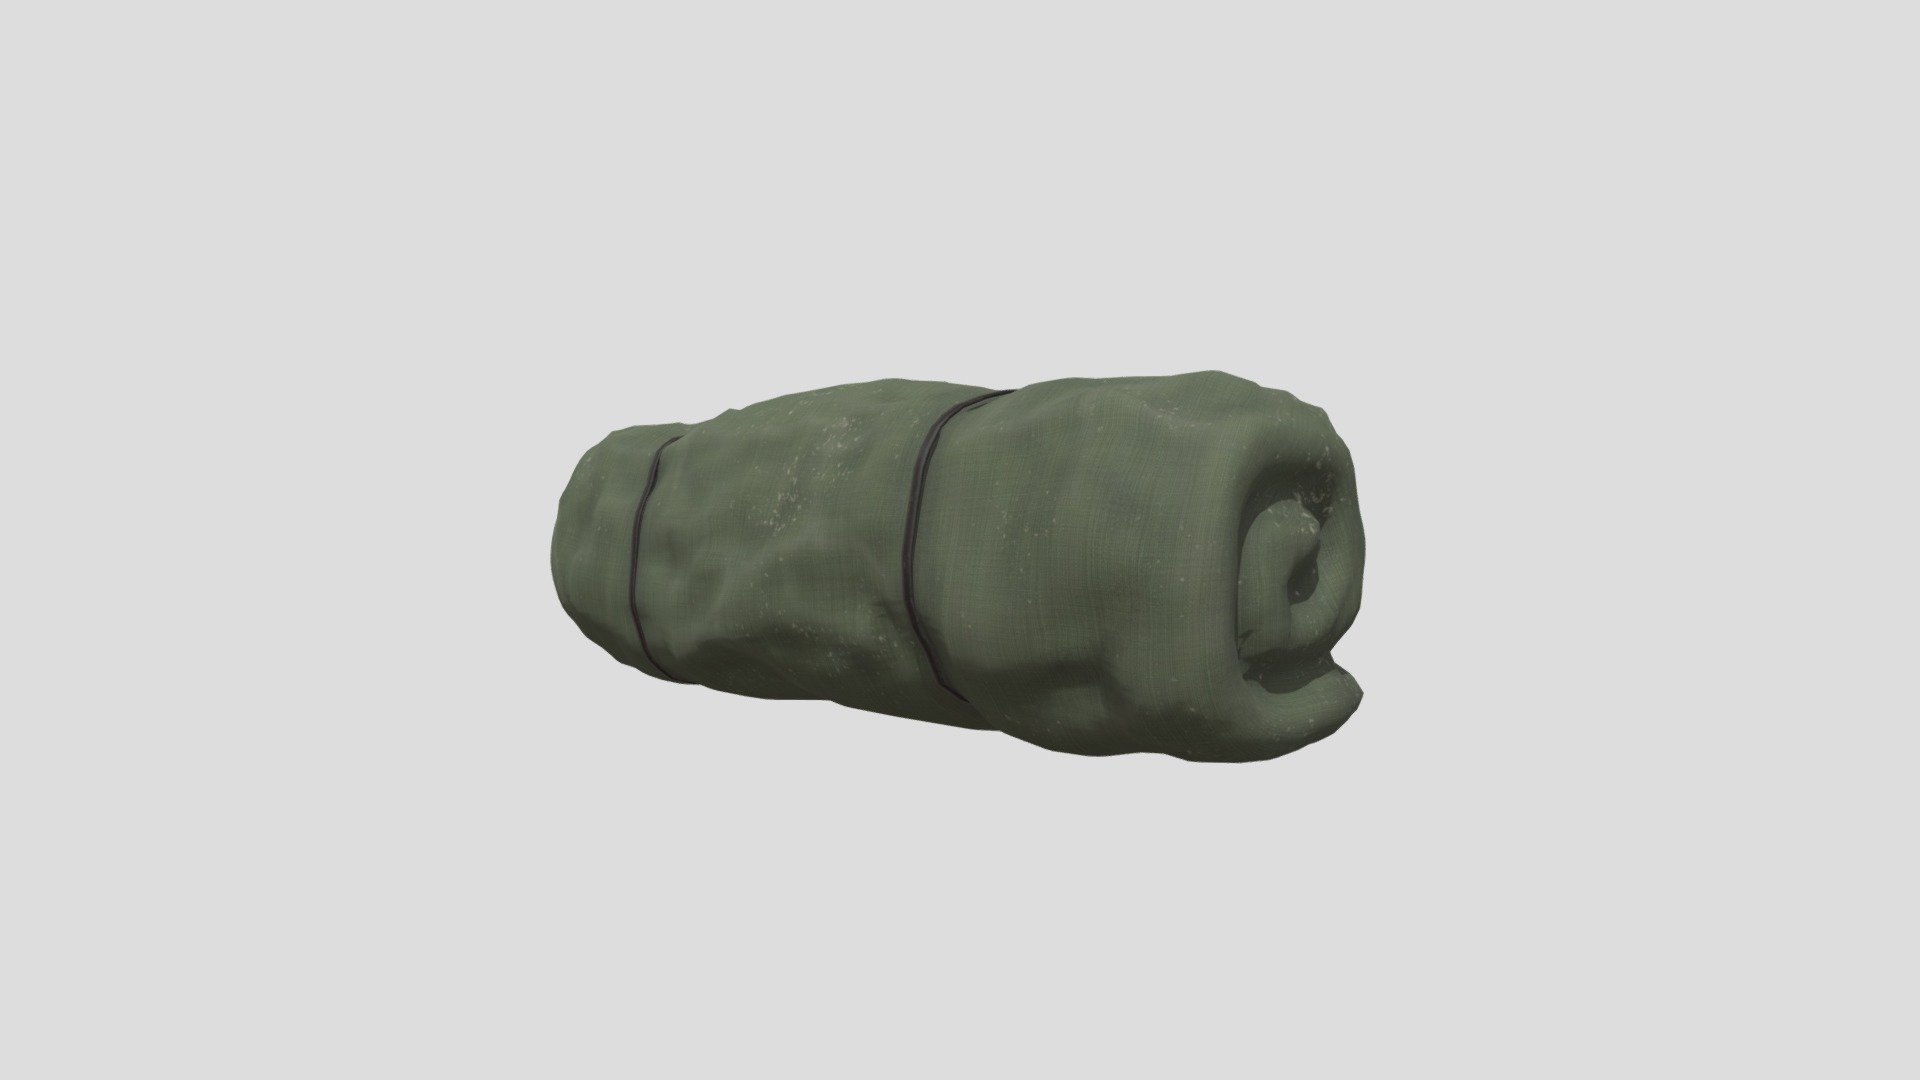 A quick, low-poly model of some rolled military tarp that I sculpted in Blender. Decided to make one since I couldn’t find any models of this despite being a rather prominent feature on a lot of Cold War/Modern MBTs and other military vehicles. Very quick and dirty texture job in Substance.

Please feel free to leave constructive criticism as to how I could improve the model as this is my first model that isn’t a hard surface, so I would love to improve and upload a better version along with some more props/equipment 3d model